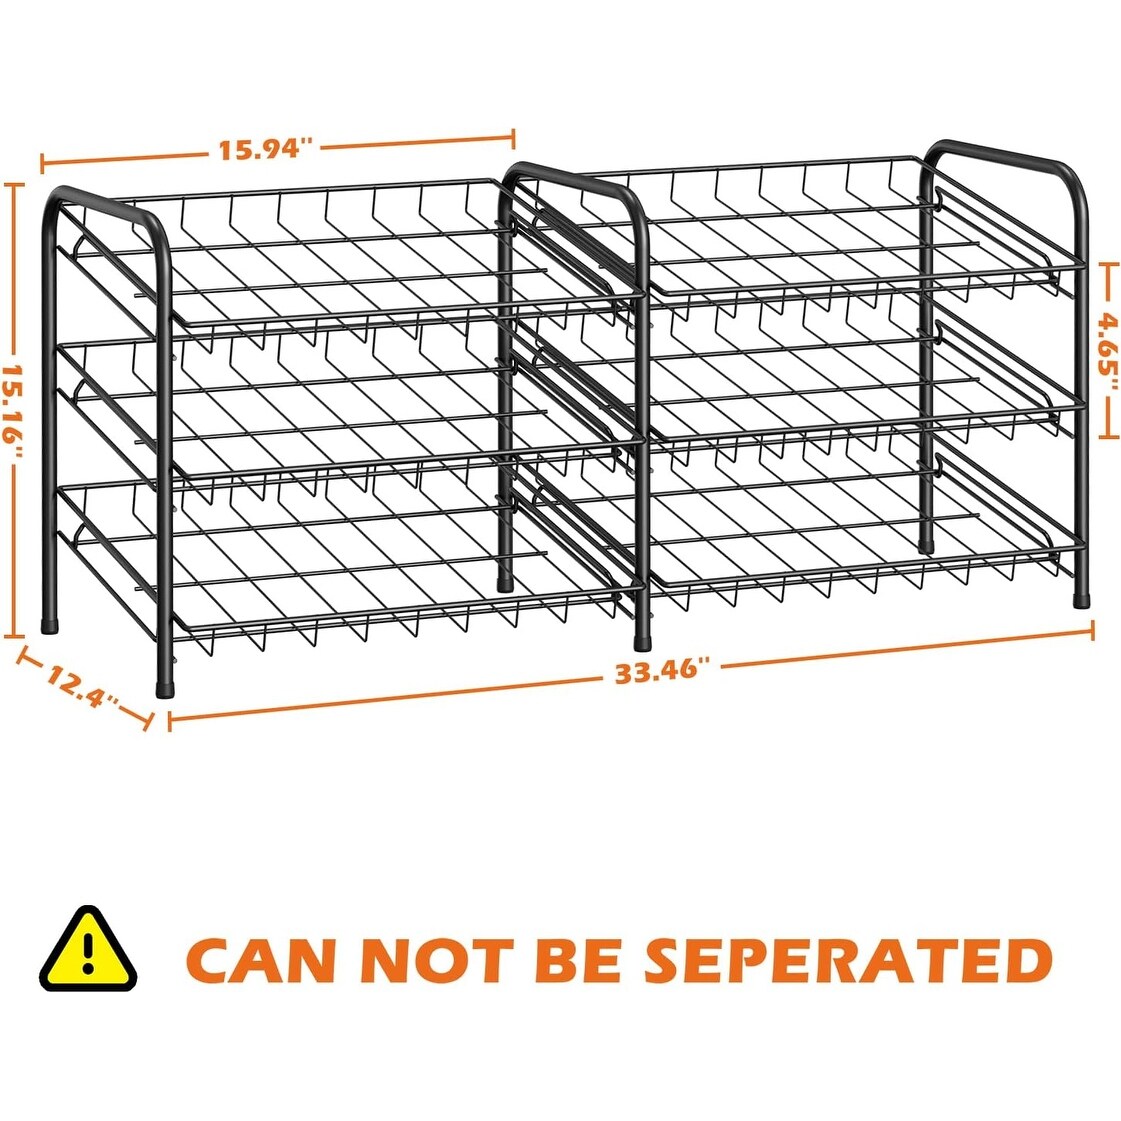 https://ak1.ostkcdn.com/images/products/is/images/direct/885a1db61ffafadbe0e867ebe6eb7a2836f74f0a/2-in-1-3-Tier-Can-Storage-Rack-Holder-Holds-Up-72-Cans.jpg